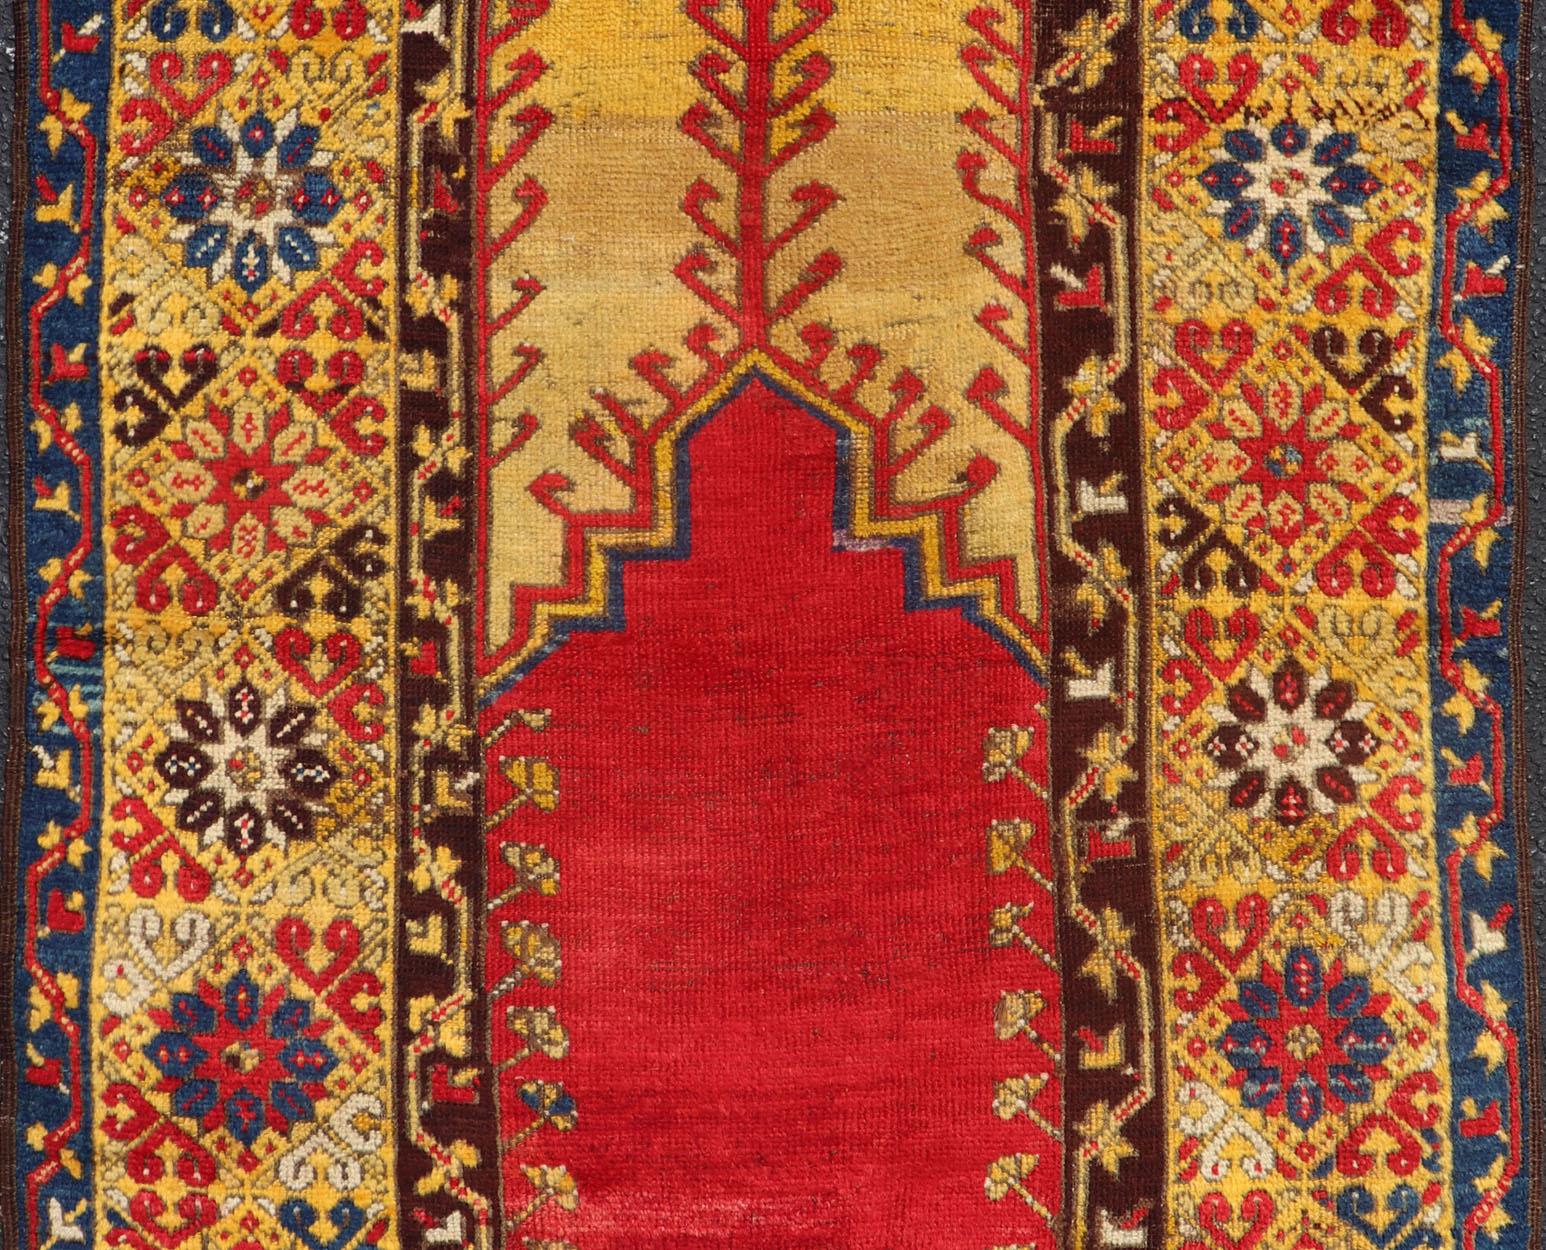 Oushak Antique Turkish Prayer Rug in Vibrant Saffron Yellow, Gold, Red and Blue For Sale